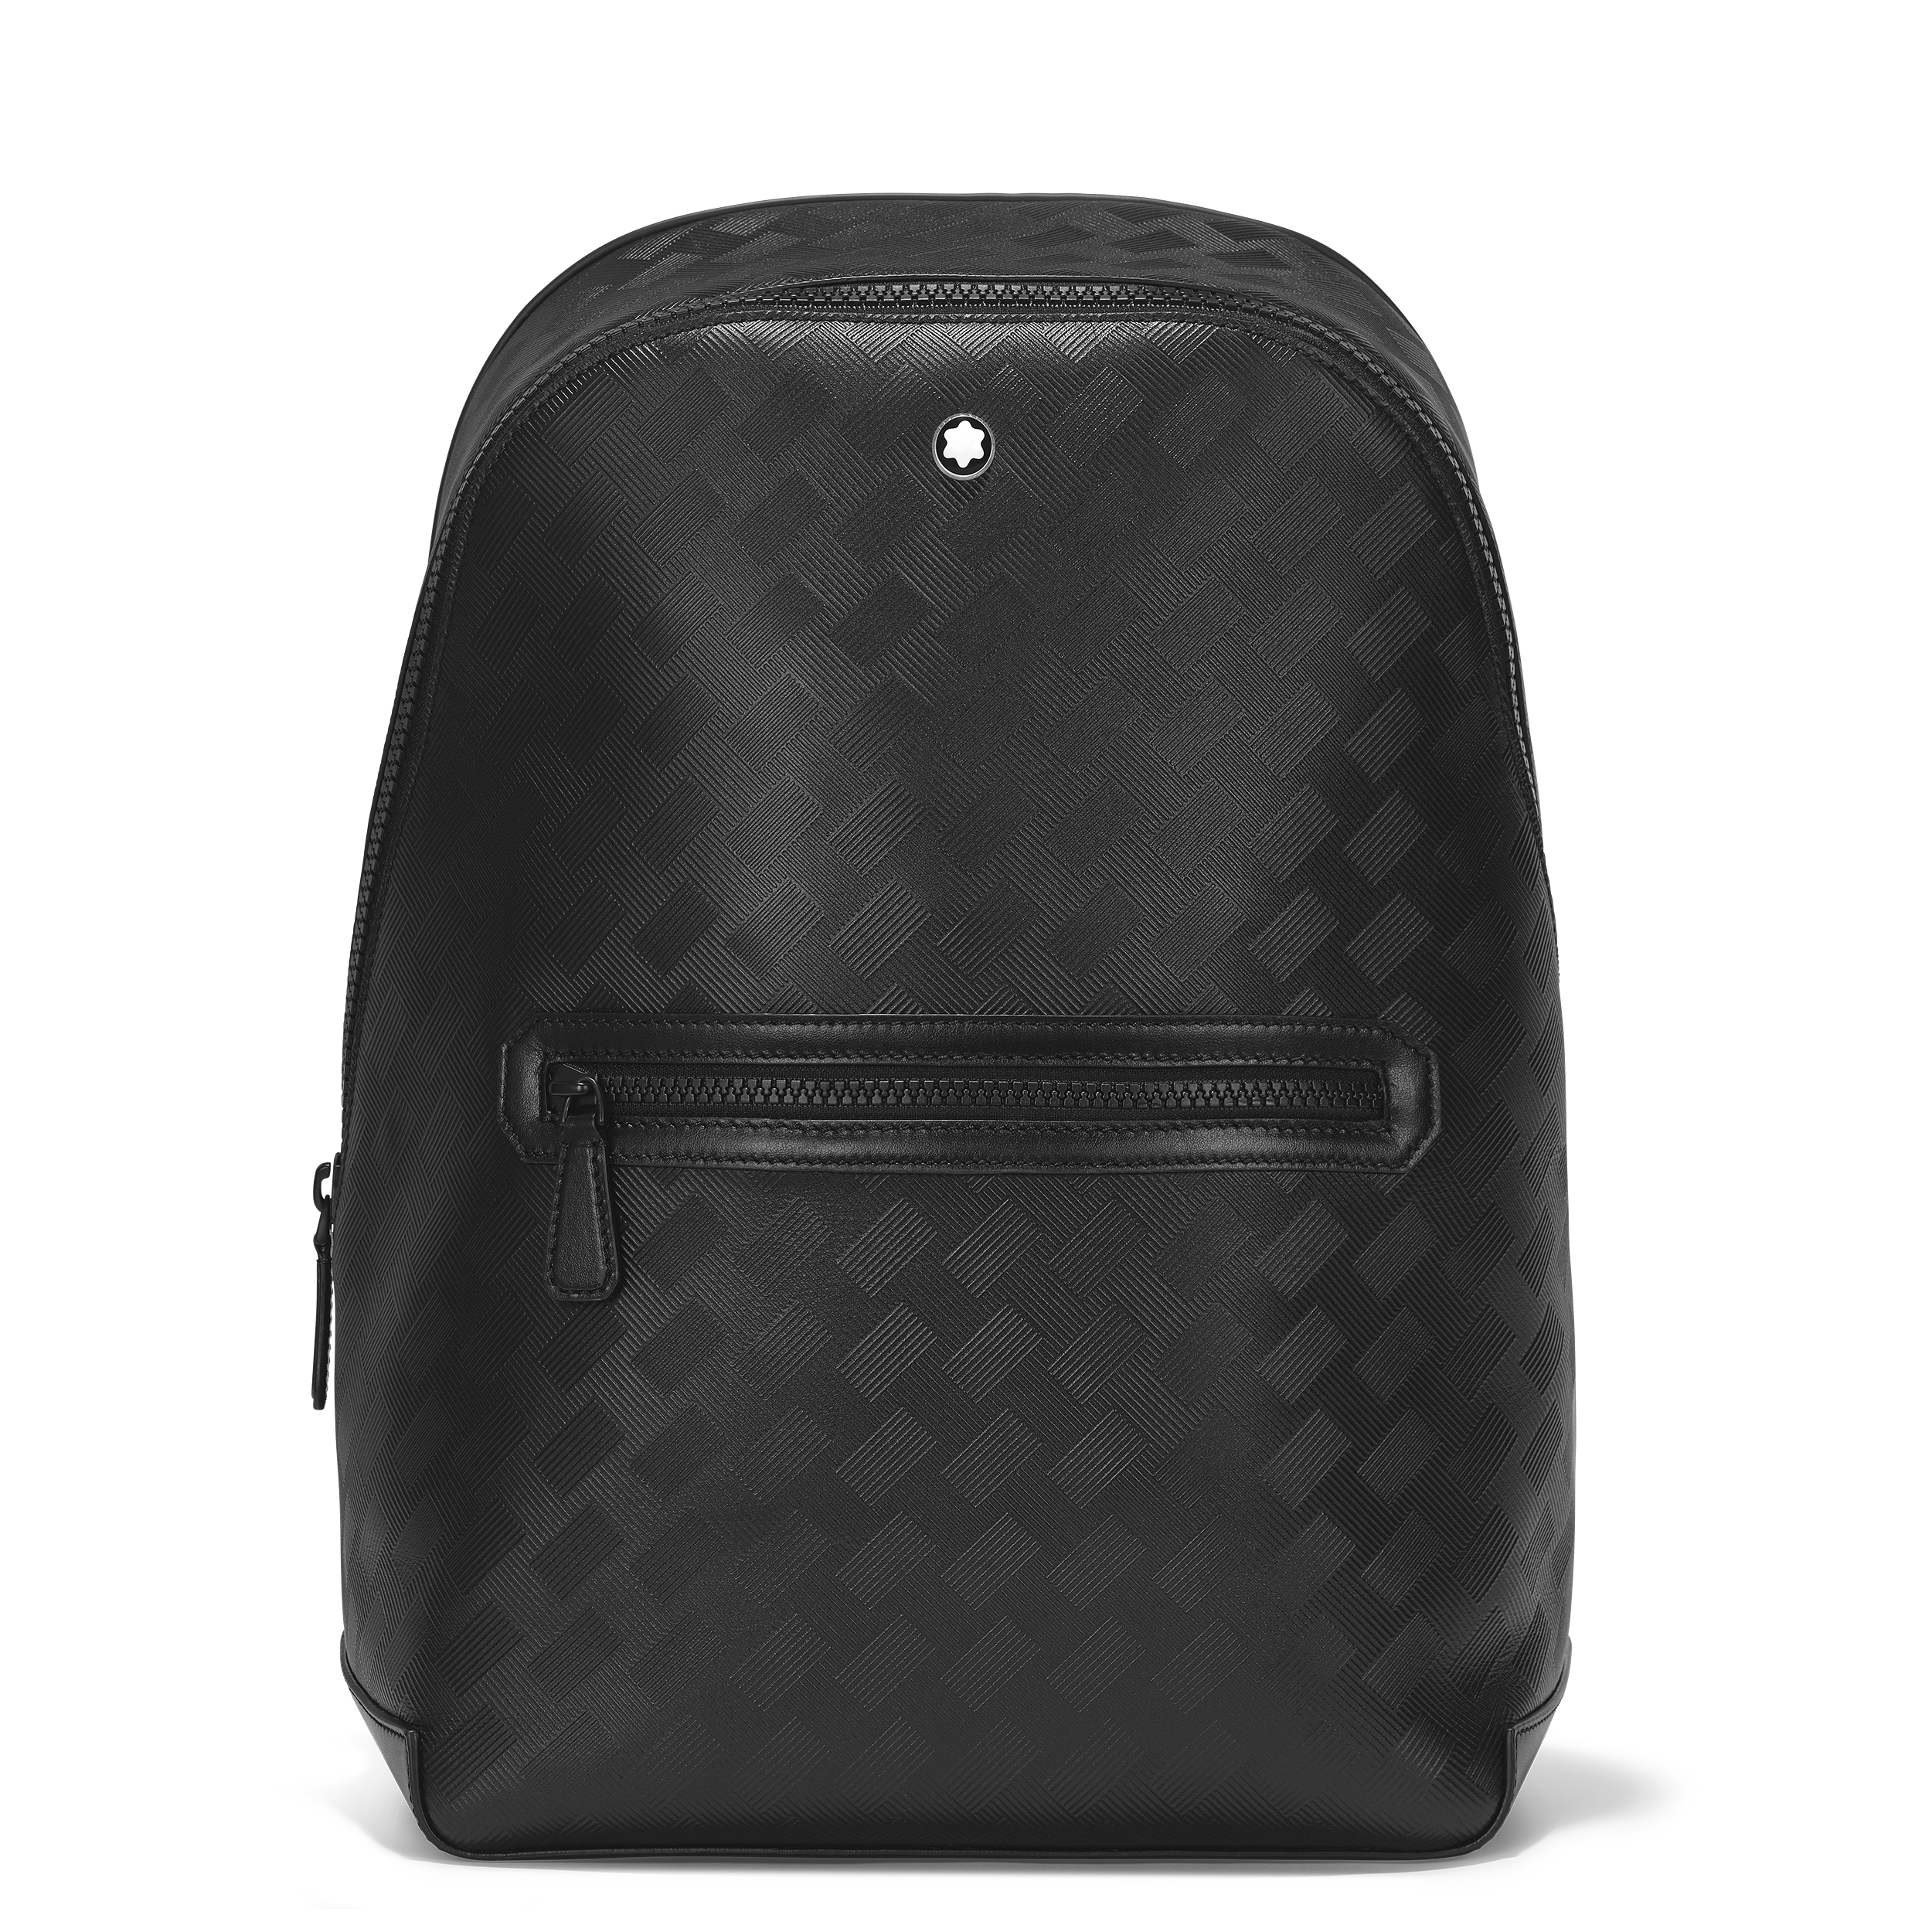 Montblanc Extreme 3.0 backpack